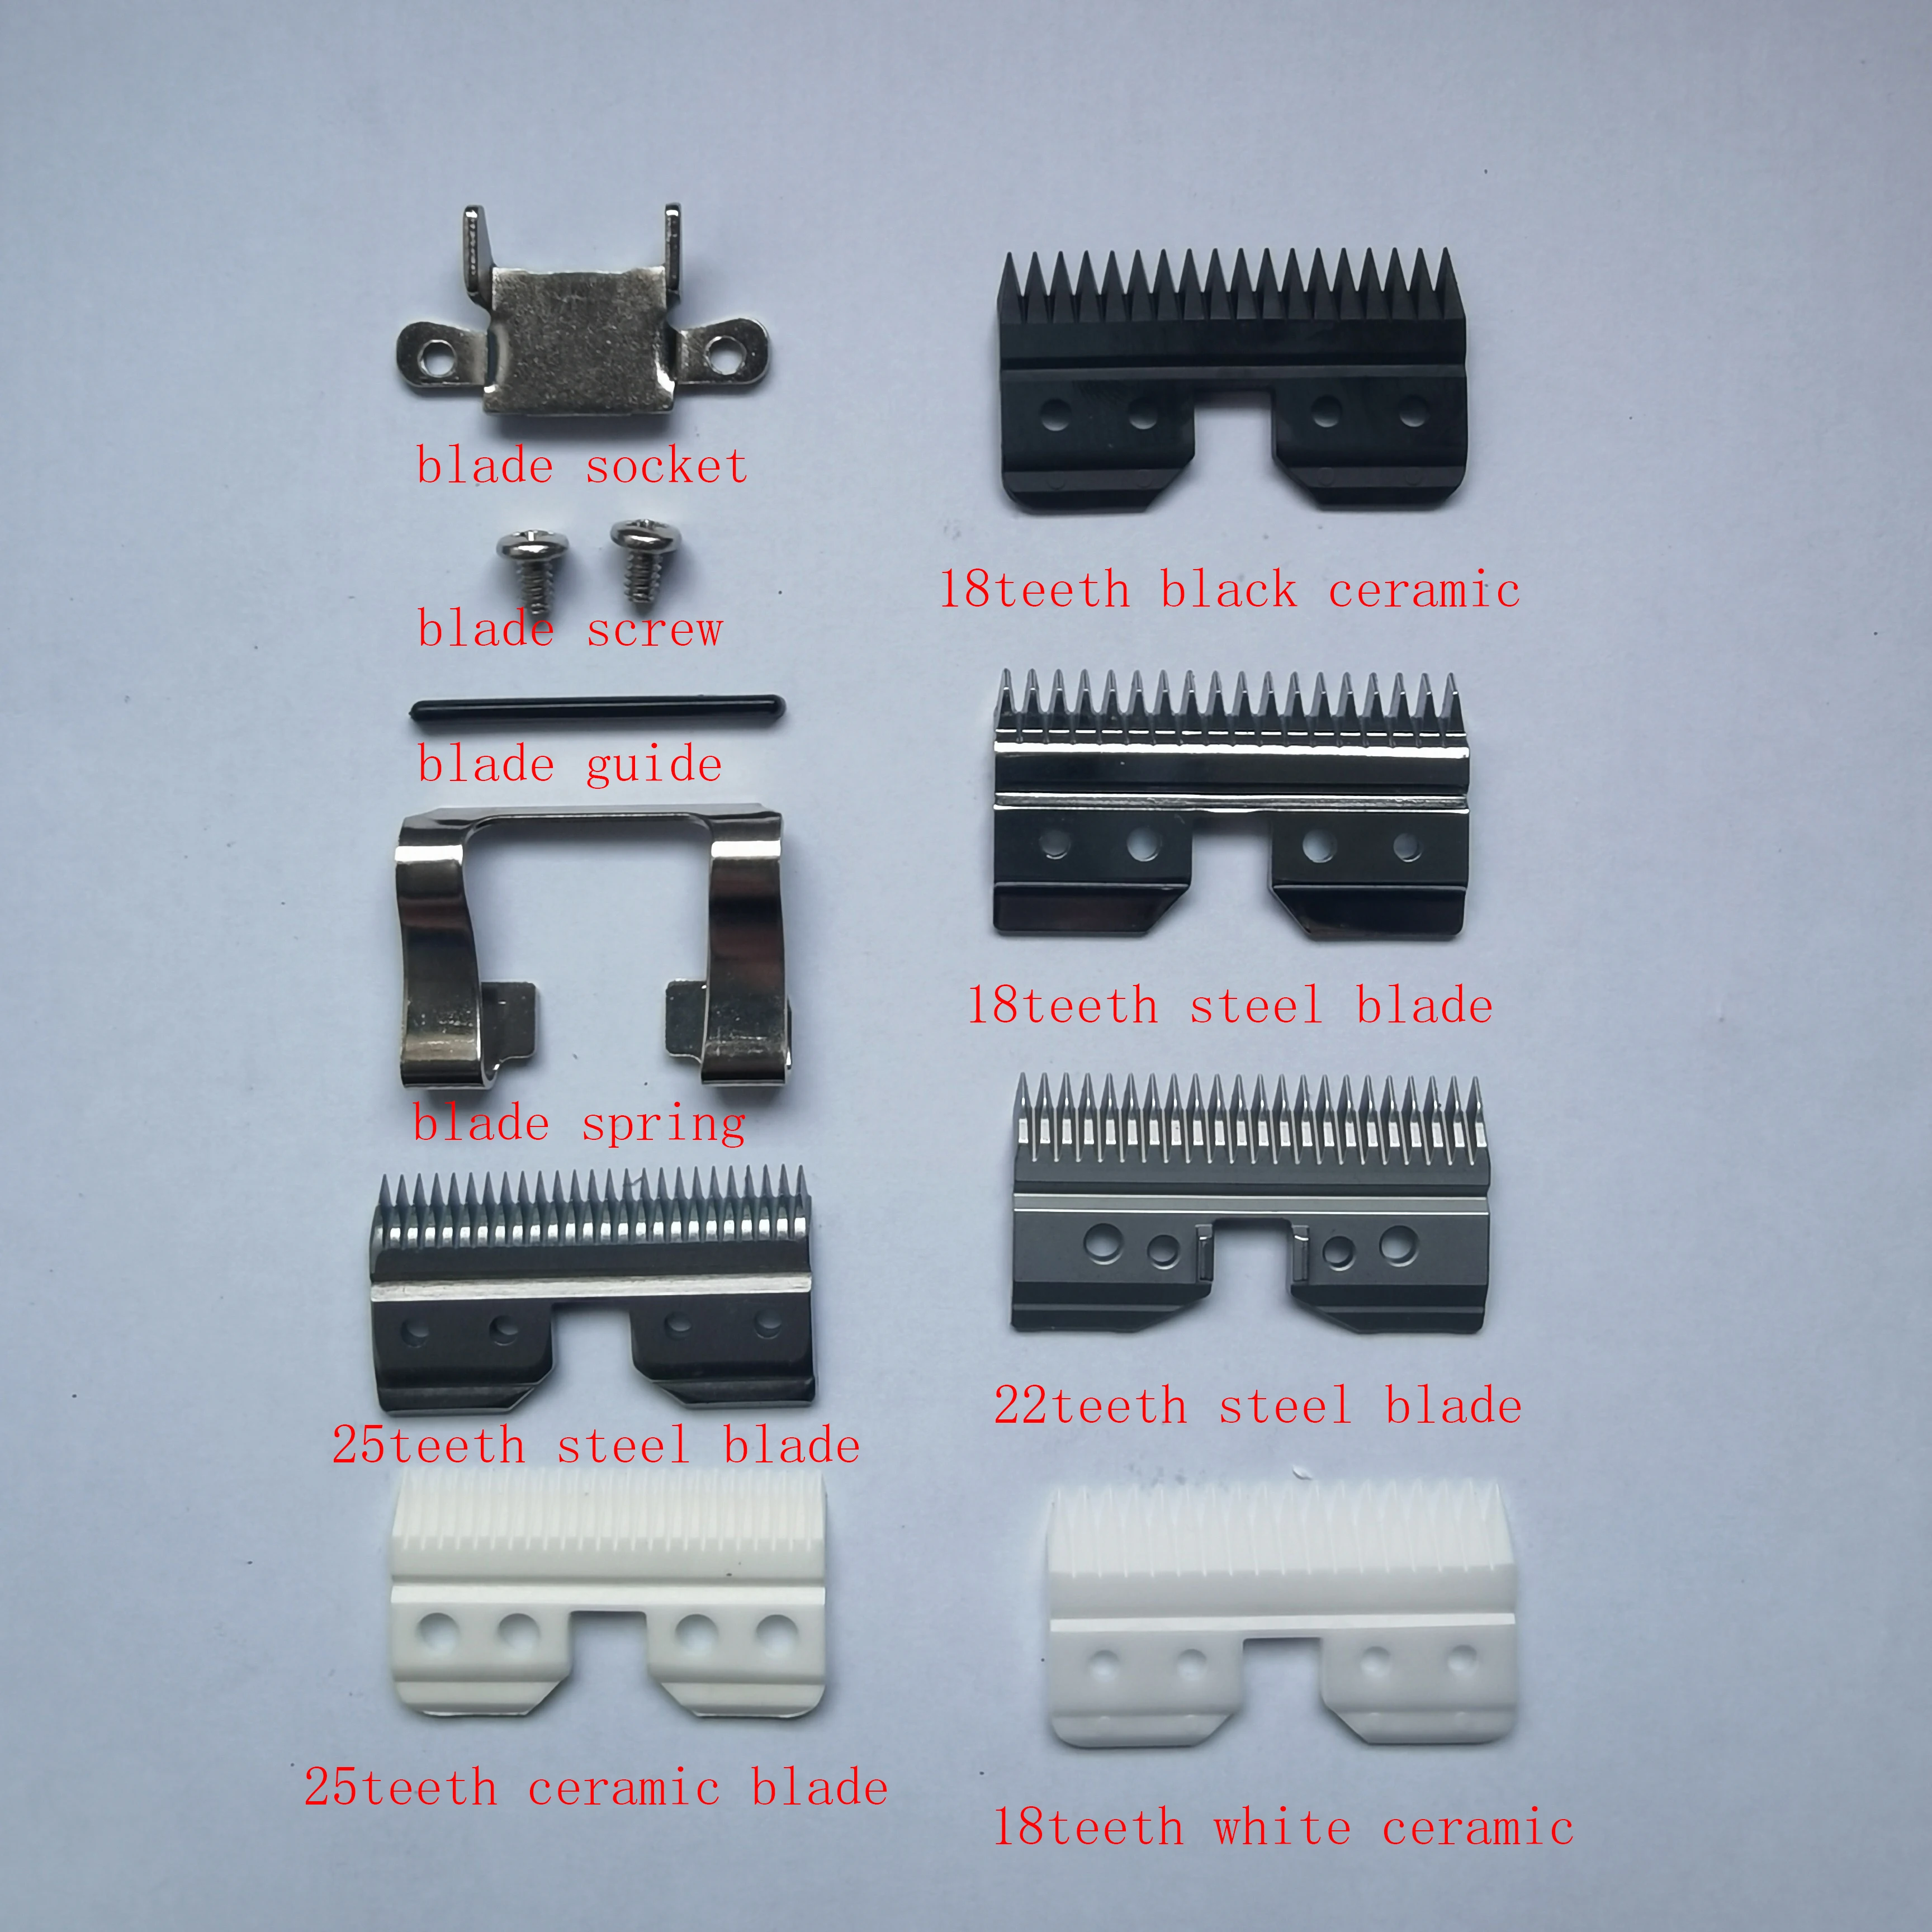 Sirreepet professional pet clipper blade parts Replacement spring socket guide screw and moving blade